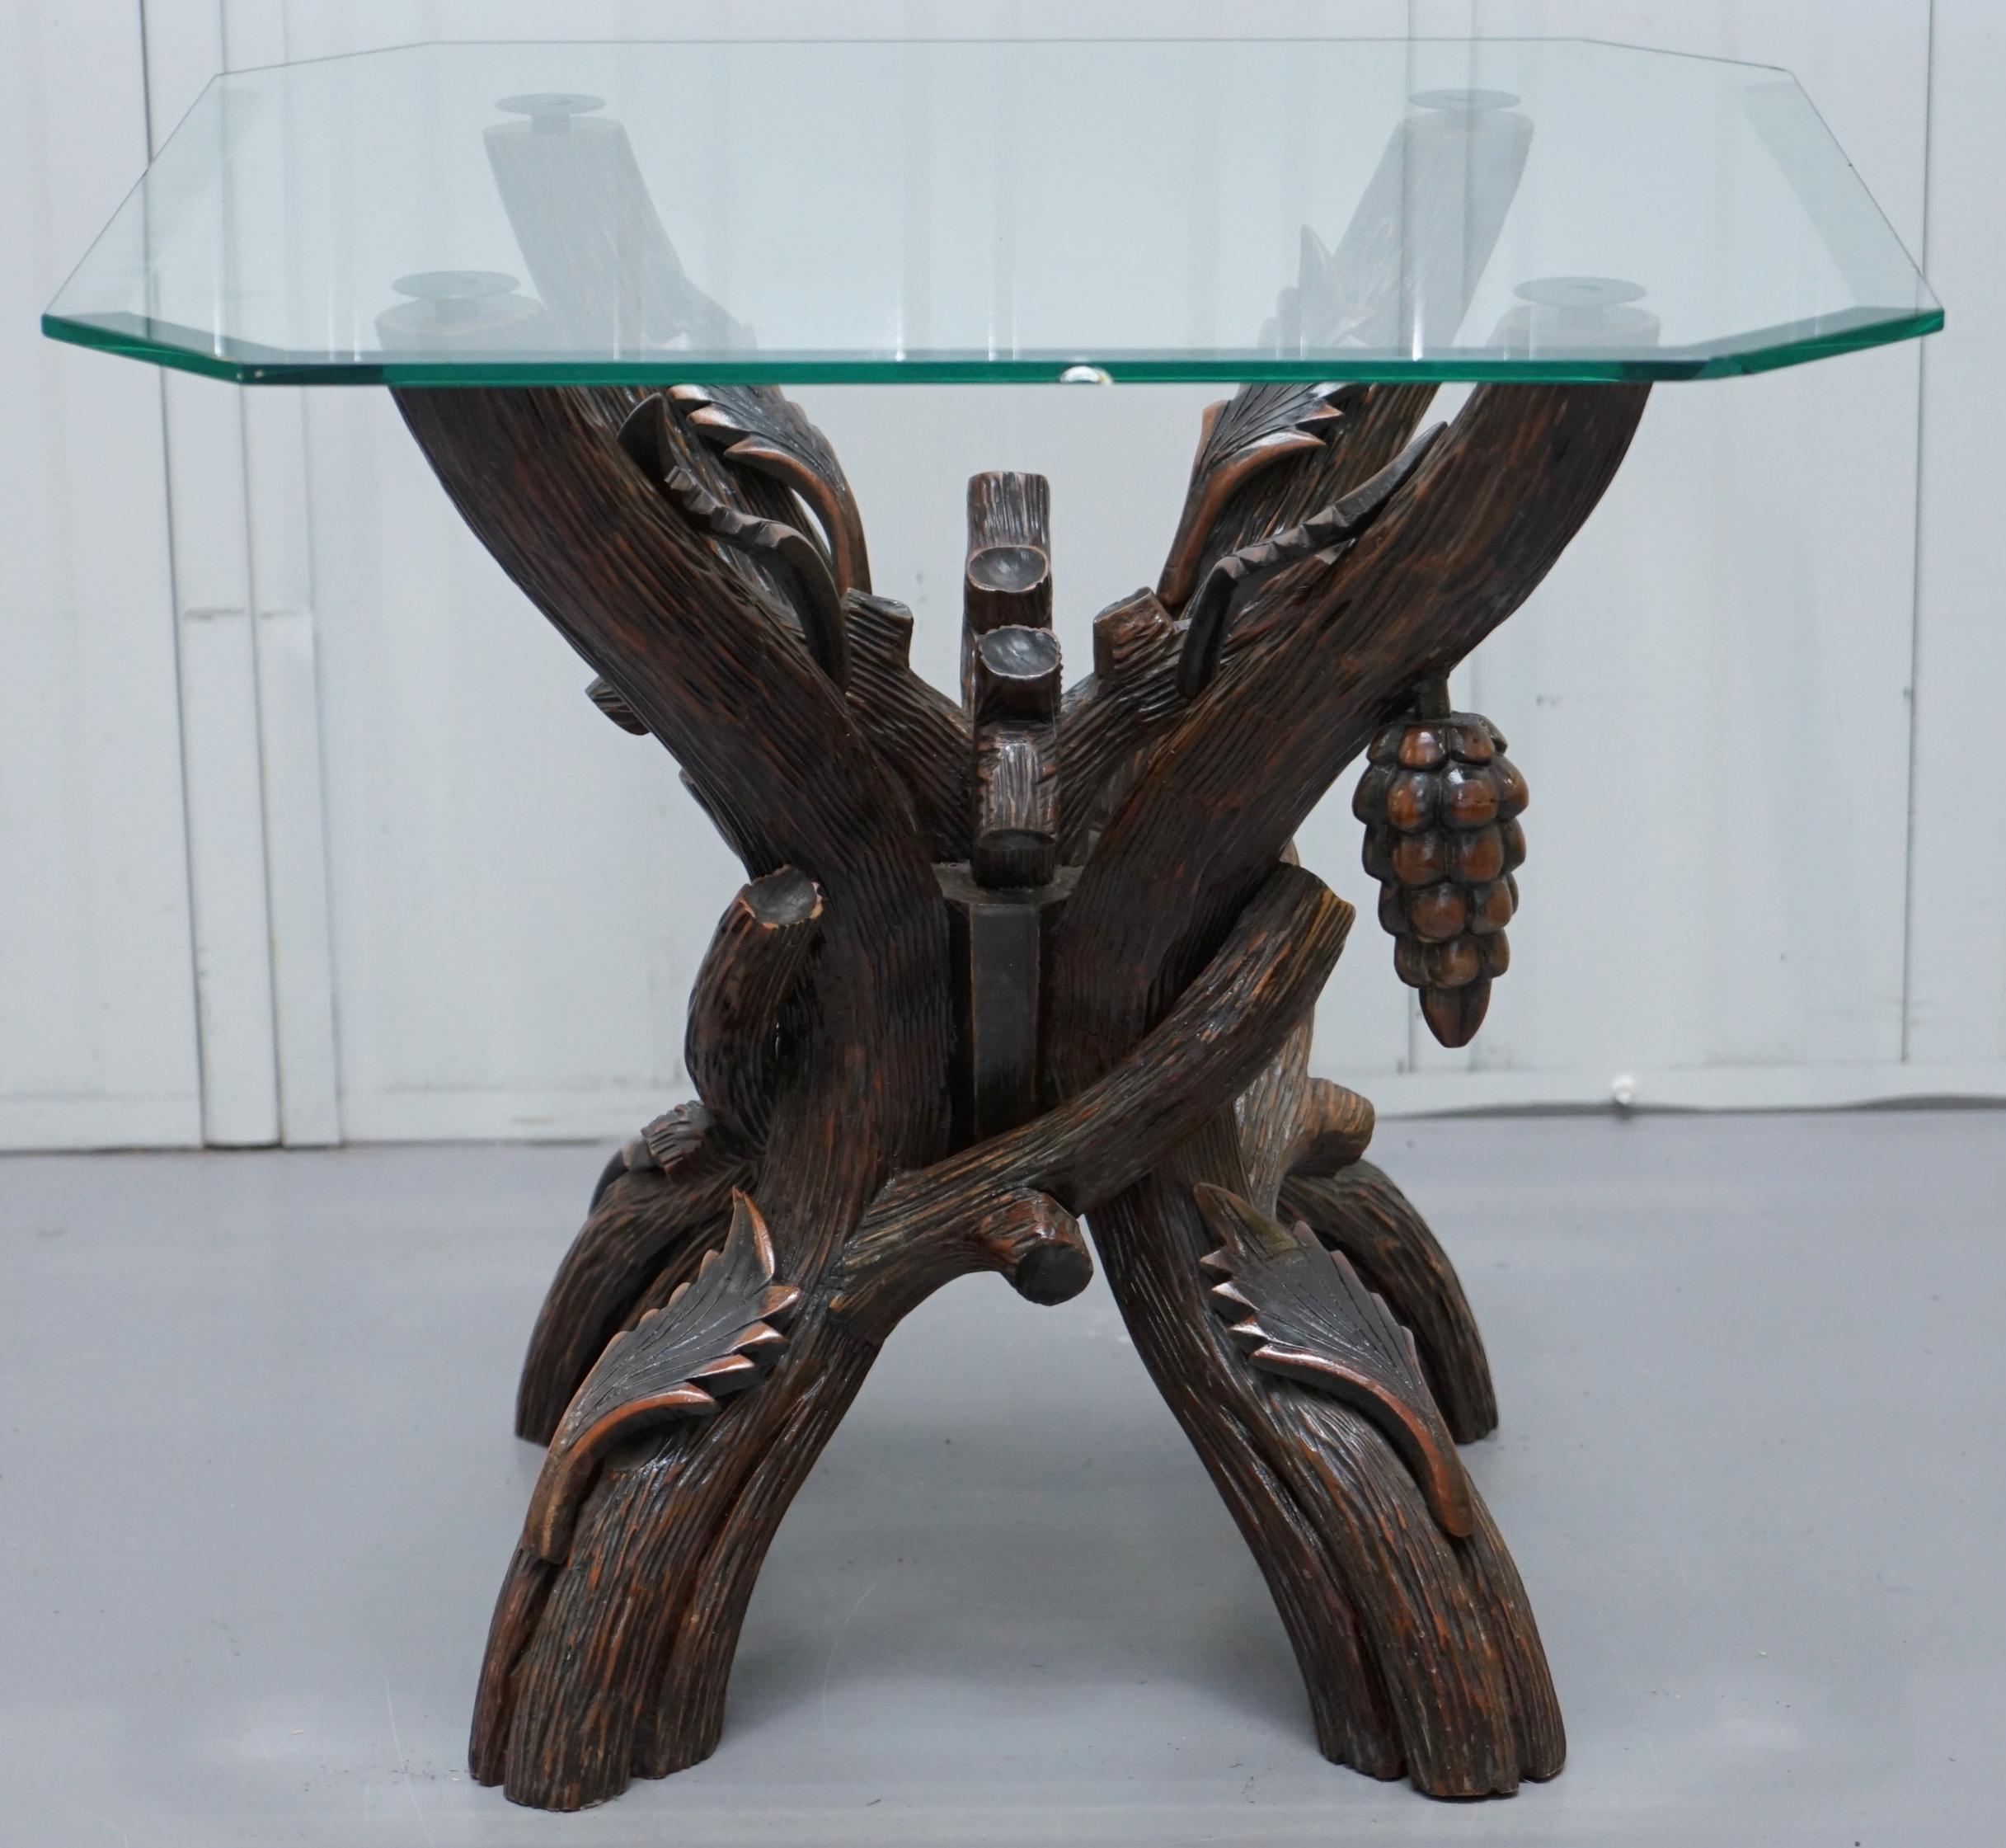 We are delighted to offer for sale this nice vintage black forest wood carved side lamp table with tapered glass top

A good looking and well-made piece, the legs are carved from wood to look like tree trunks, there are leaved and one bunch of